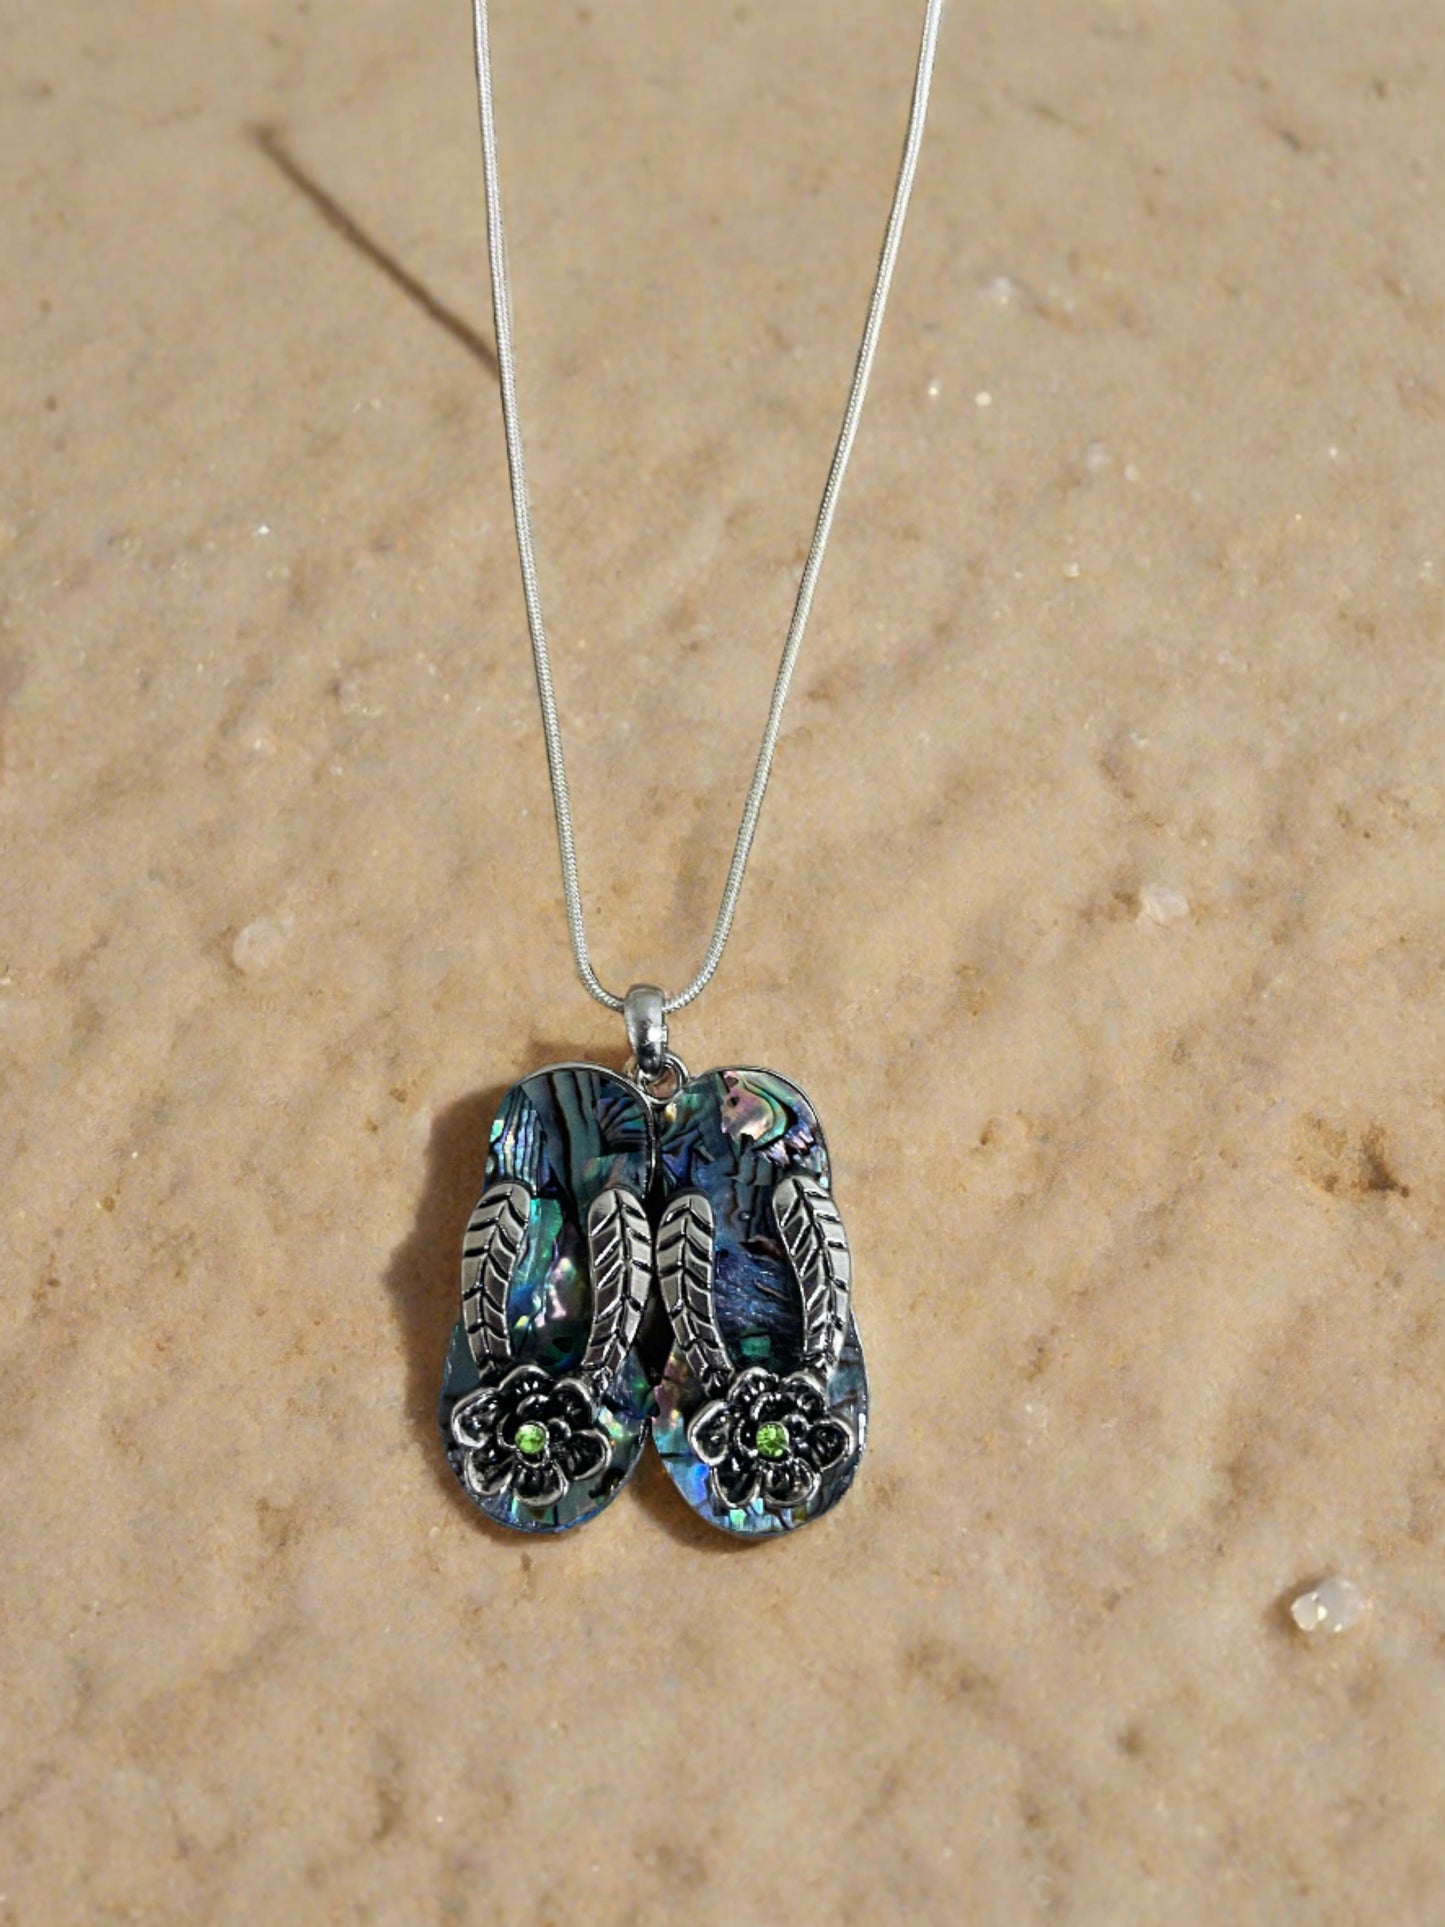 Abalone Shell Flip Flop Pendant on a Silver chain Necklace